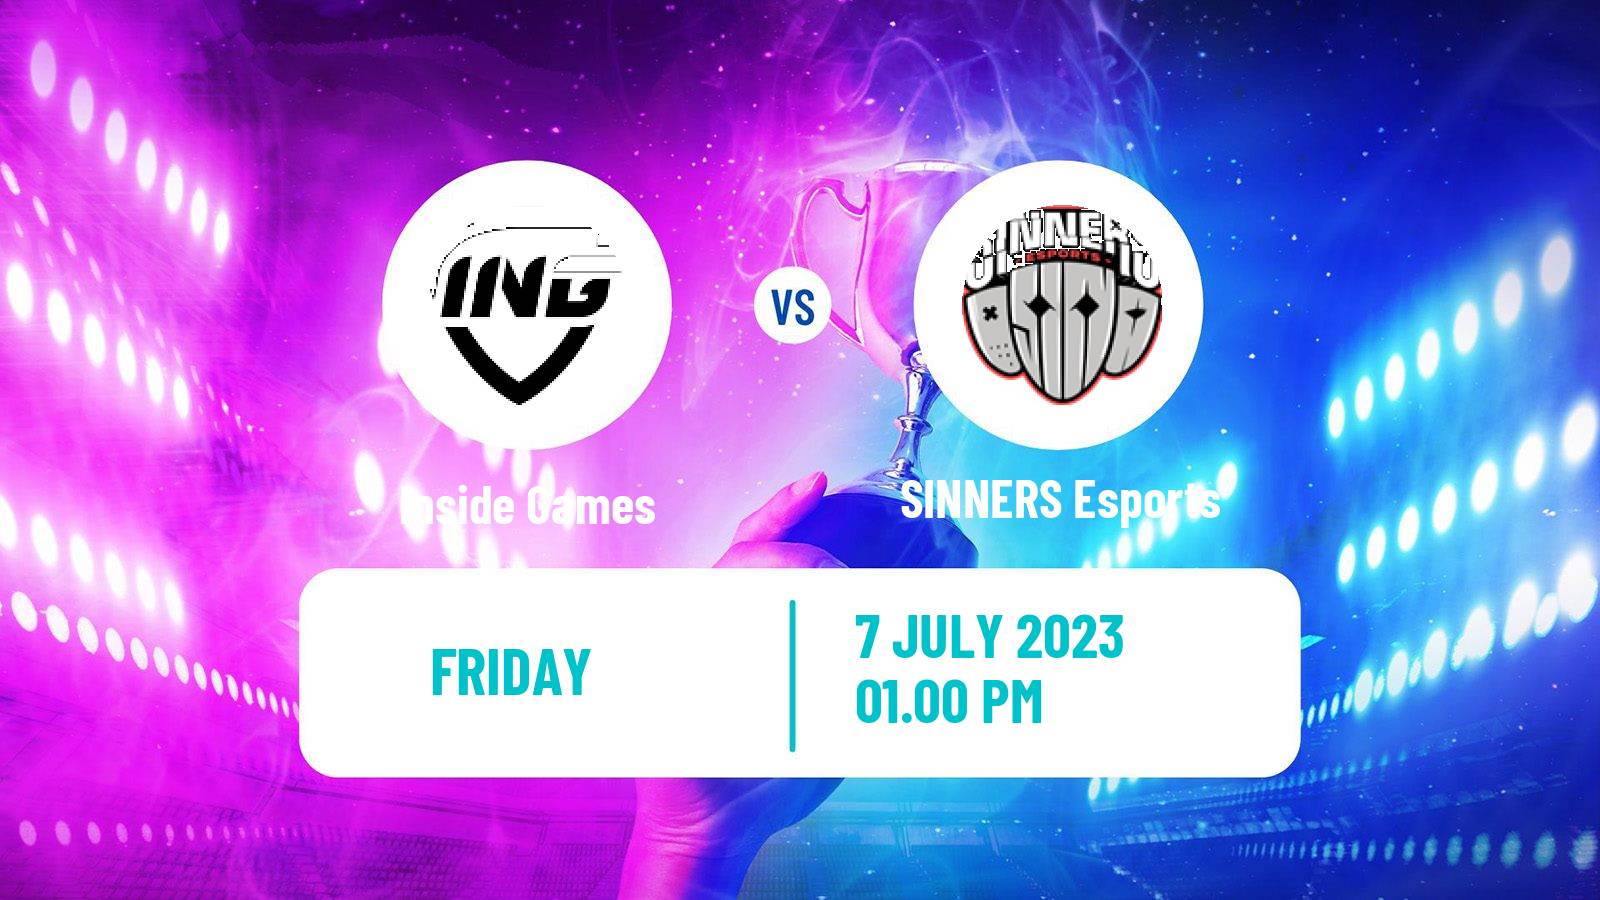 Esports League Of Legends Hitpoint Masters Inside Games - SINNERS Esports